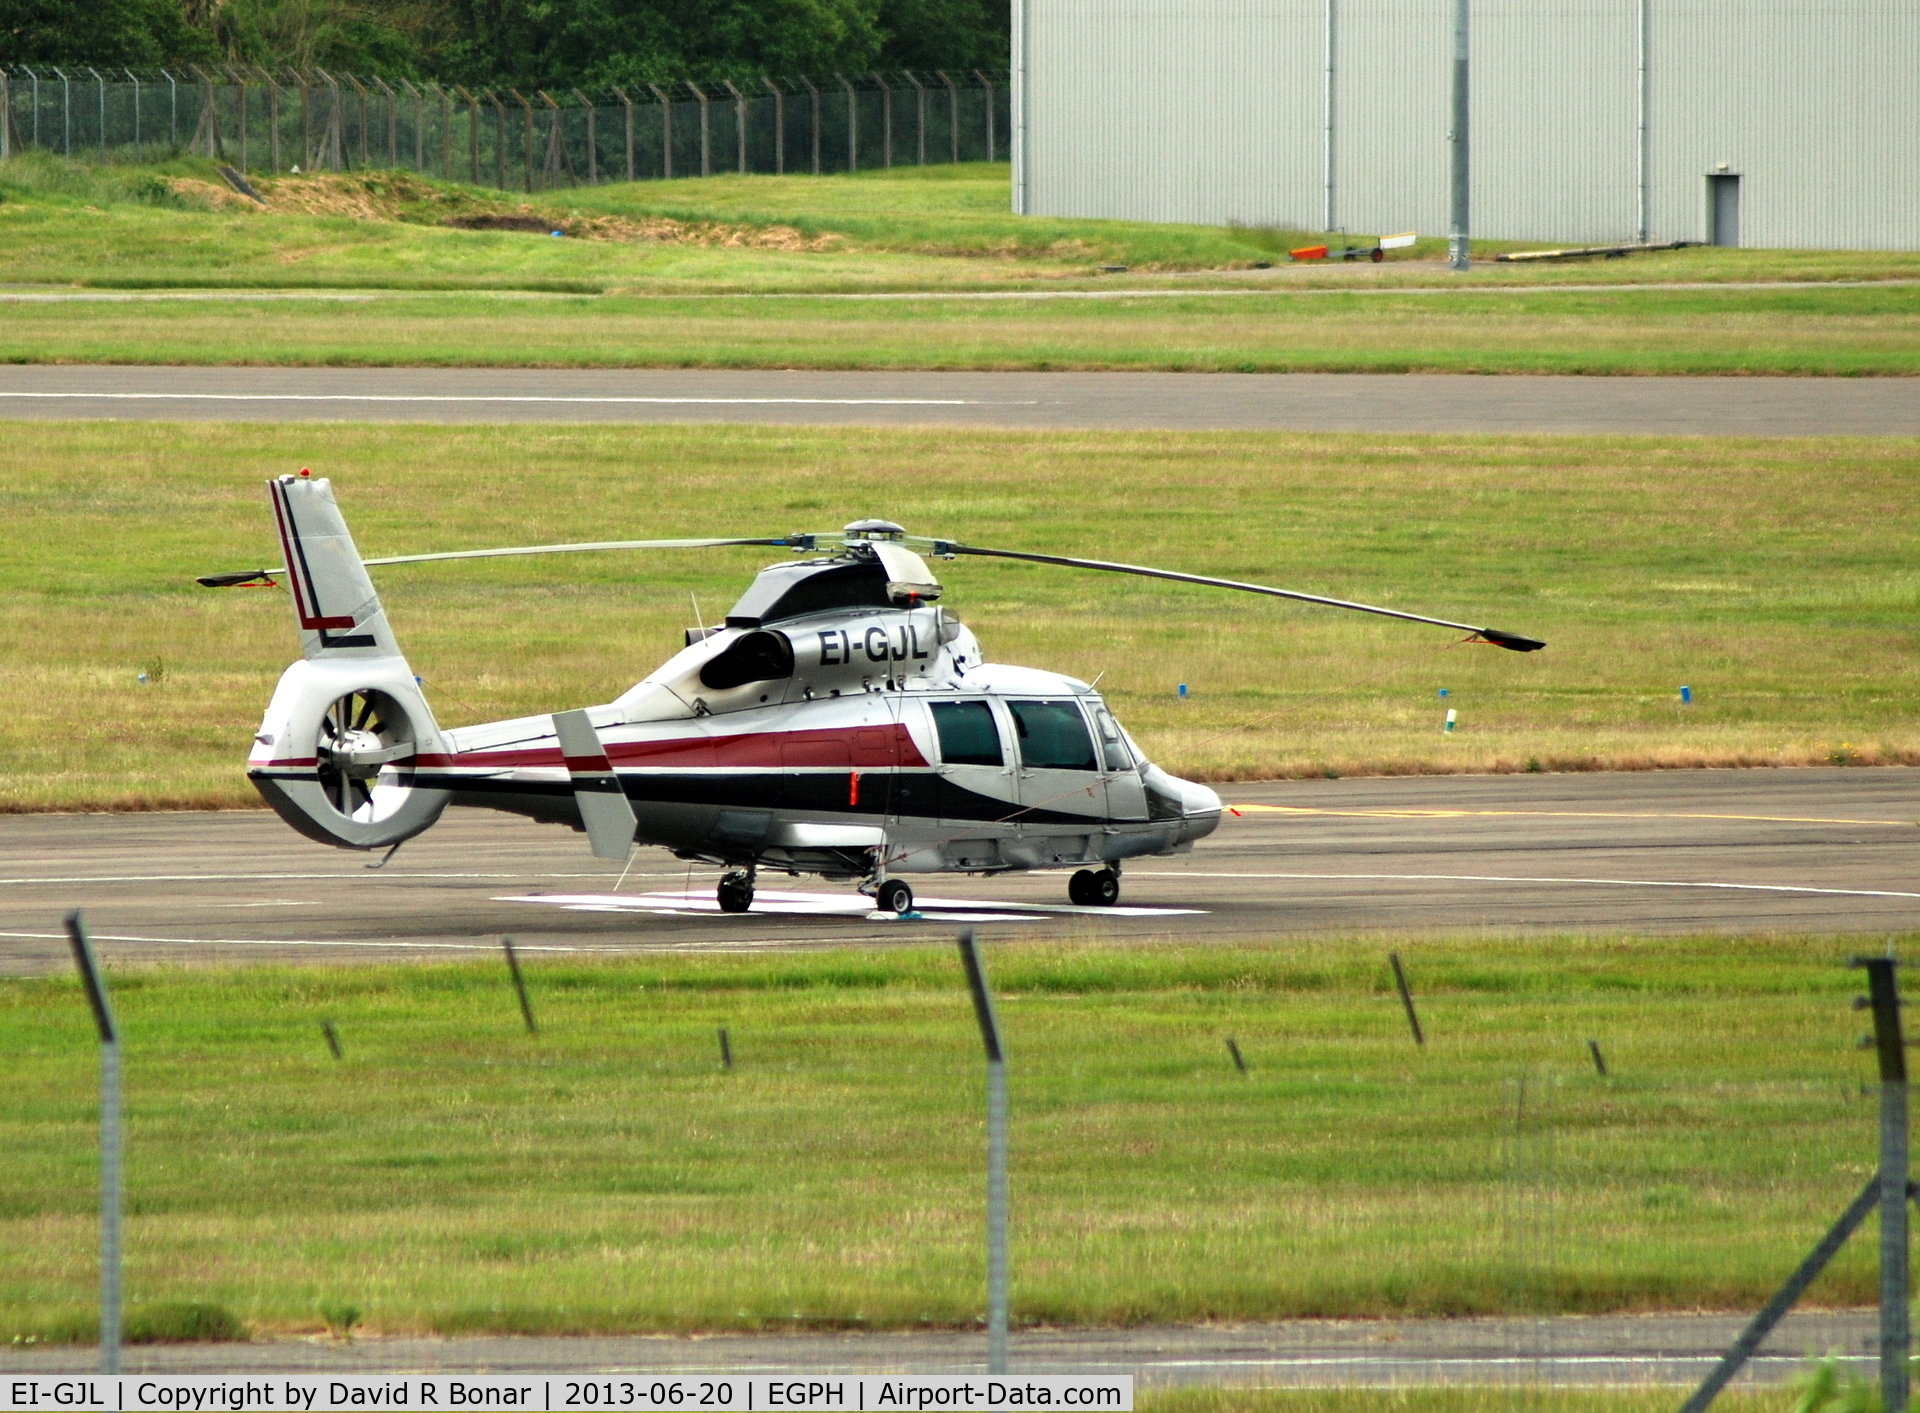 EI-GJL, 2007 Eurocopter AS-365N-3 Dauphin 2 C/N 6785, A visitor from Ireland - parked in-front of the 'Old Turnhouse' hangar